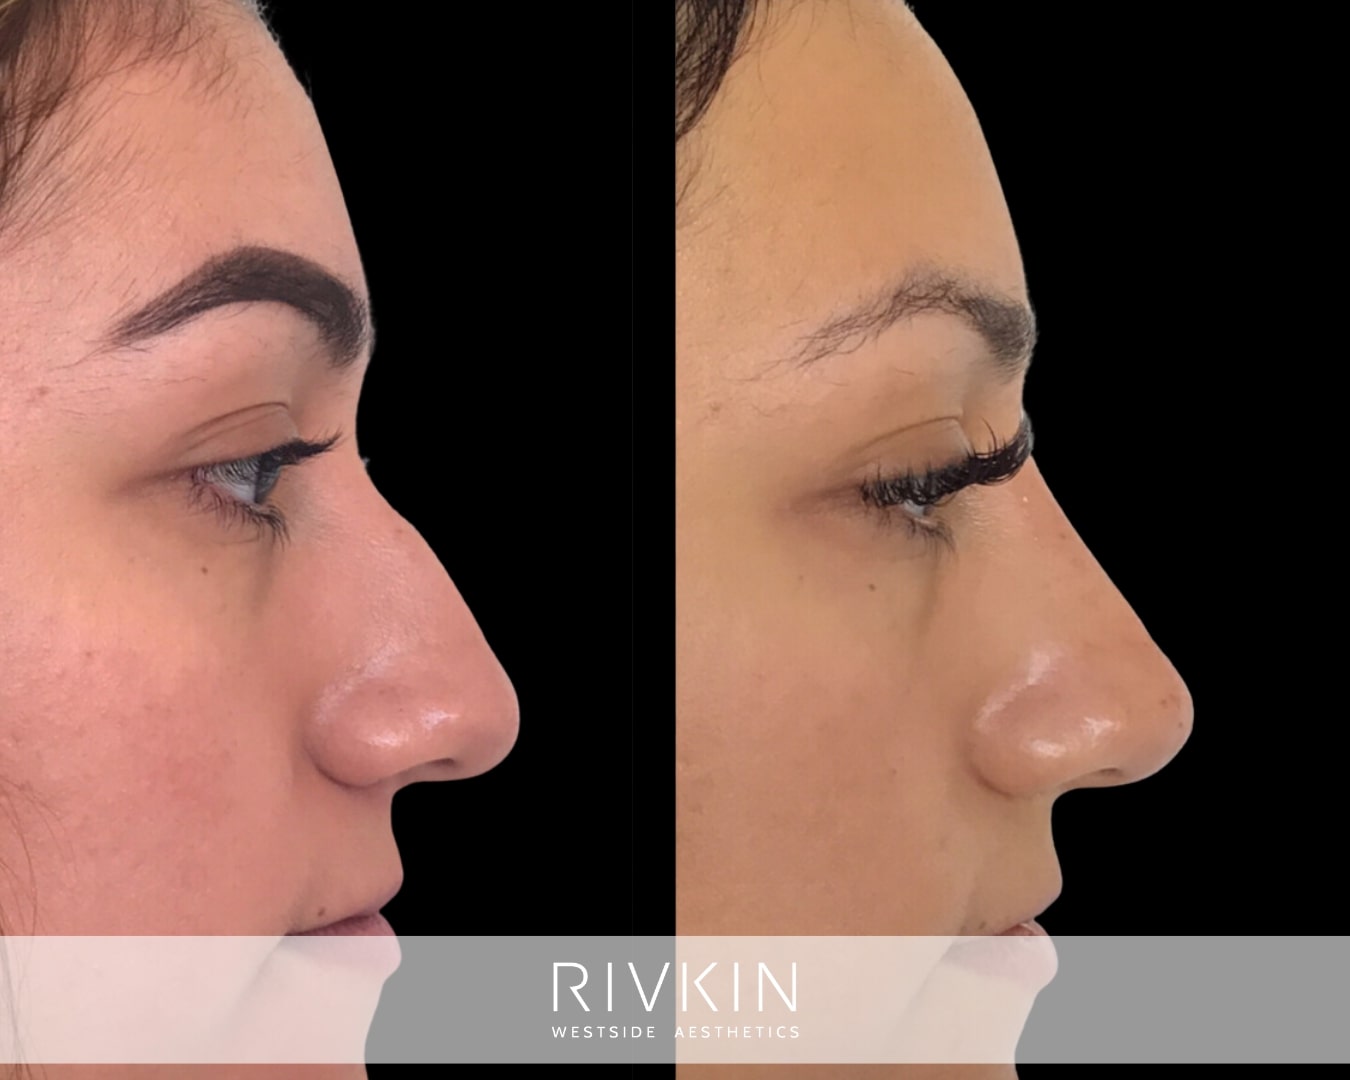 The patient's goal was to achieve a more feminine nose, and Dr. Rivkin accomplished it by straightening her overall profile.